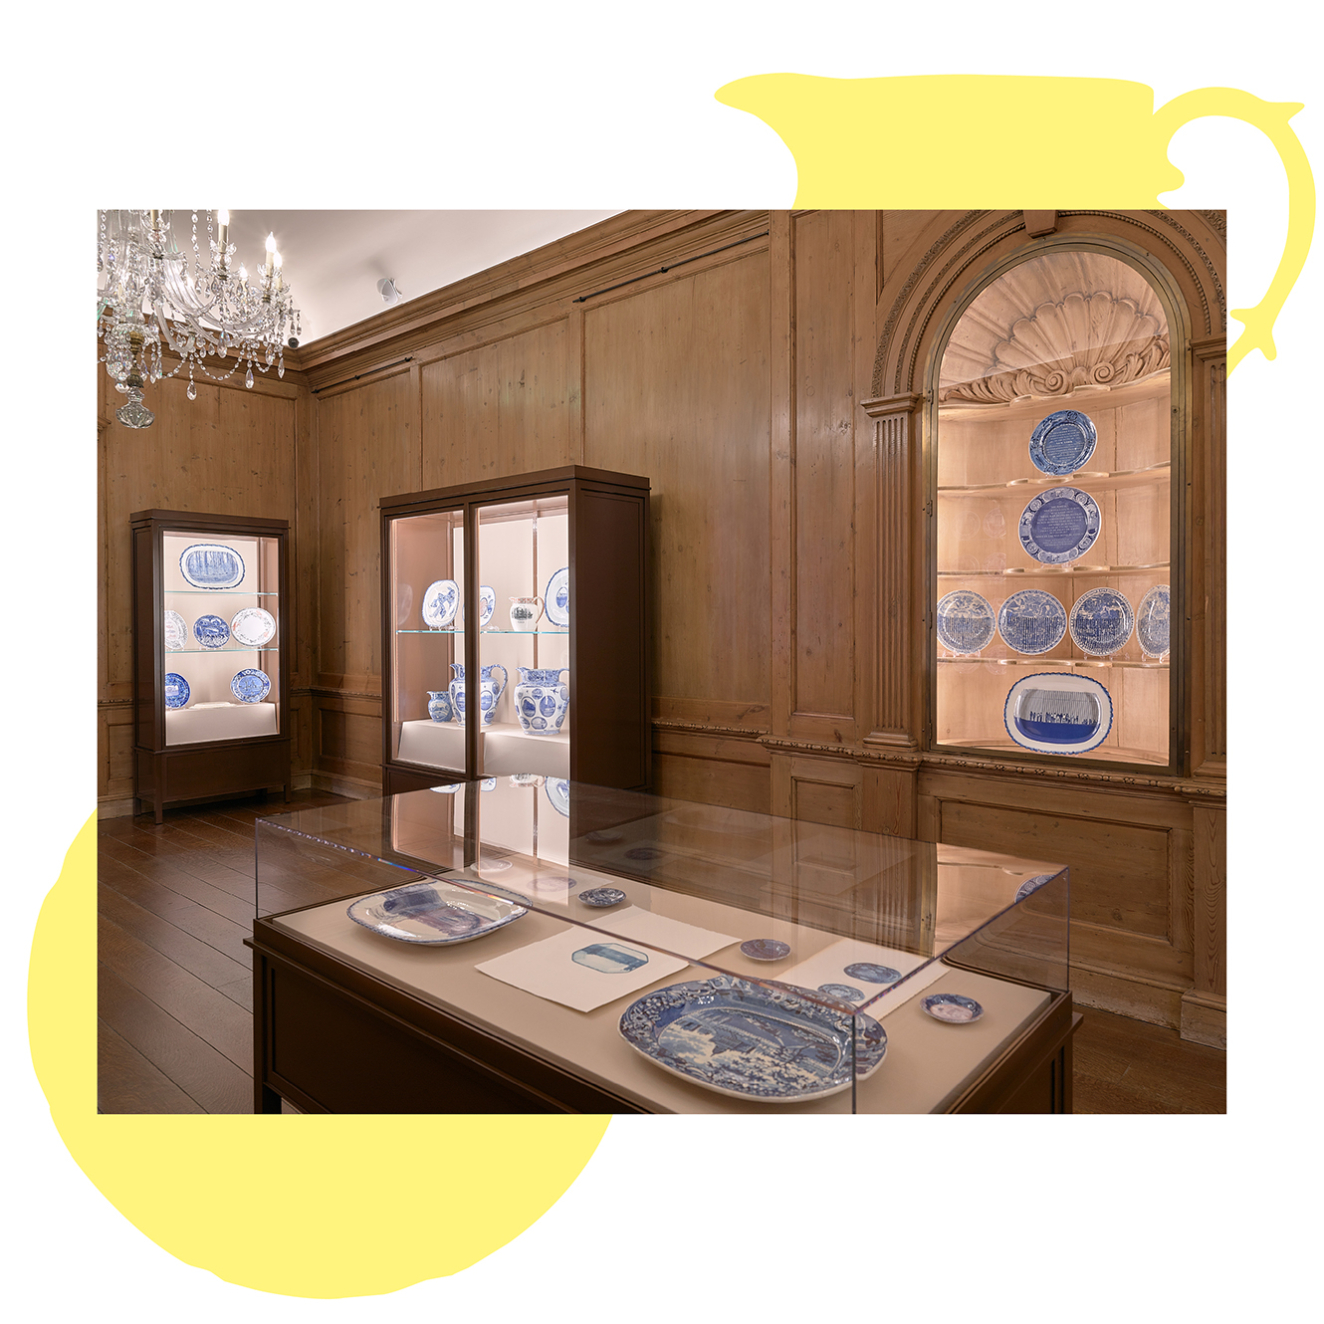 Blue and white ceramics are displayed in cases along the walls of a wood-paneled gallery. A case in the foreground contains additional works. A crystal chandelier hangs at top left.